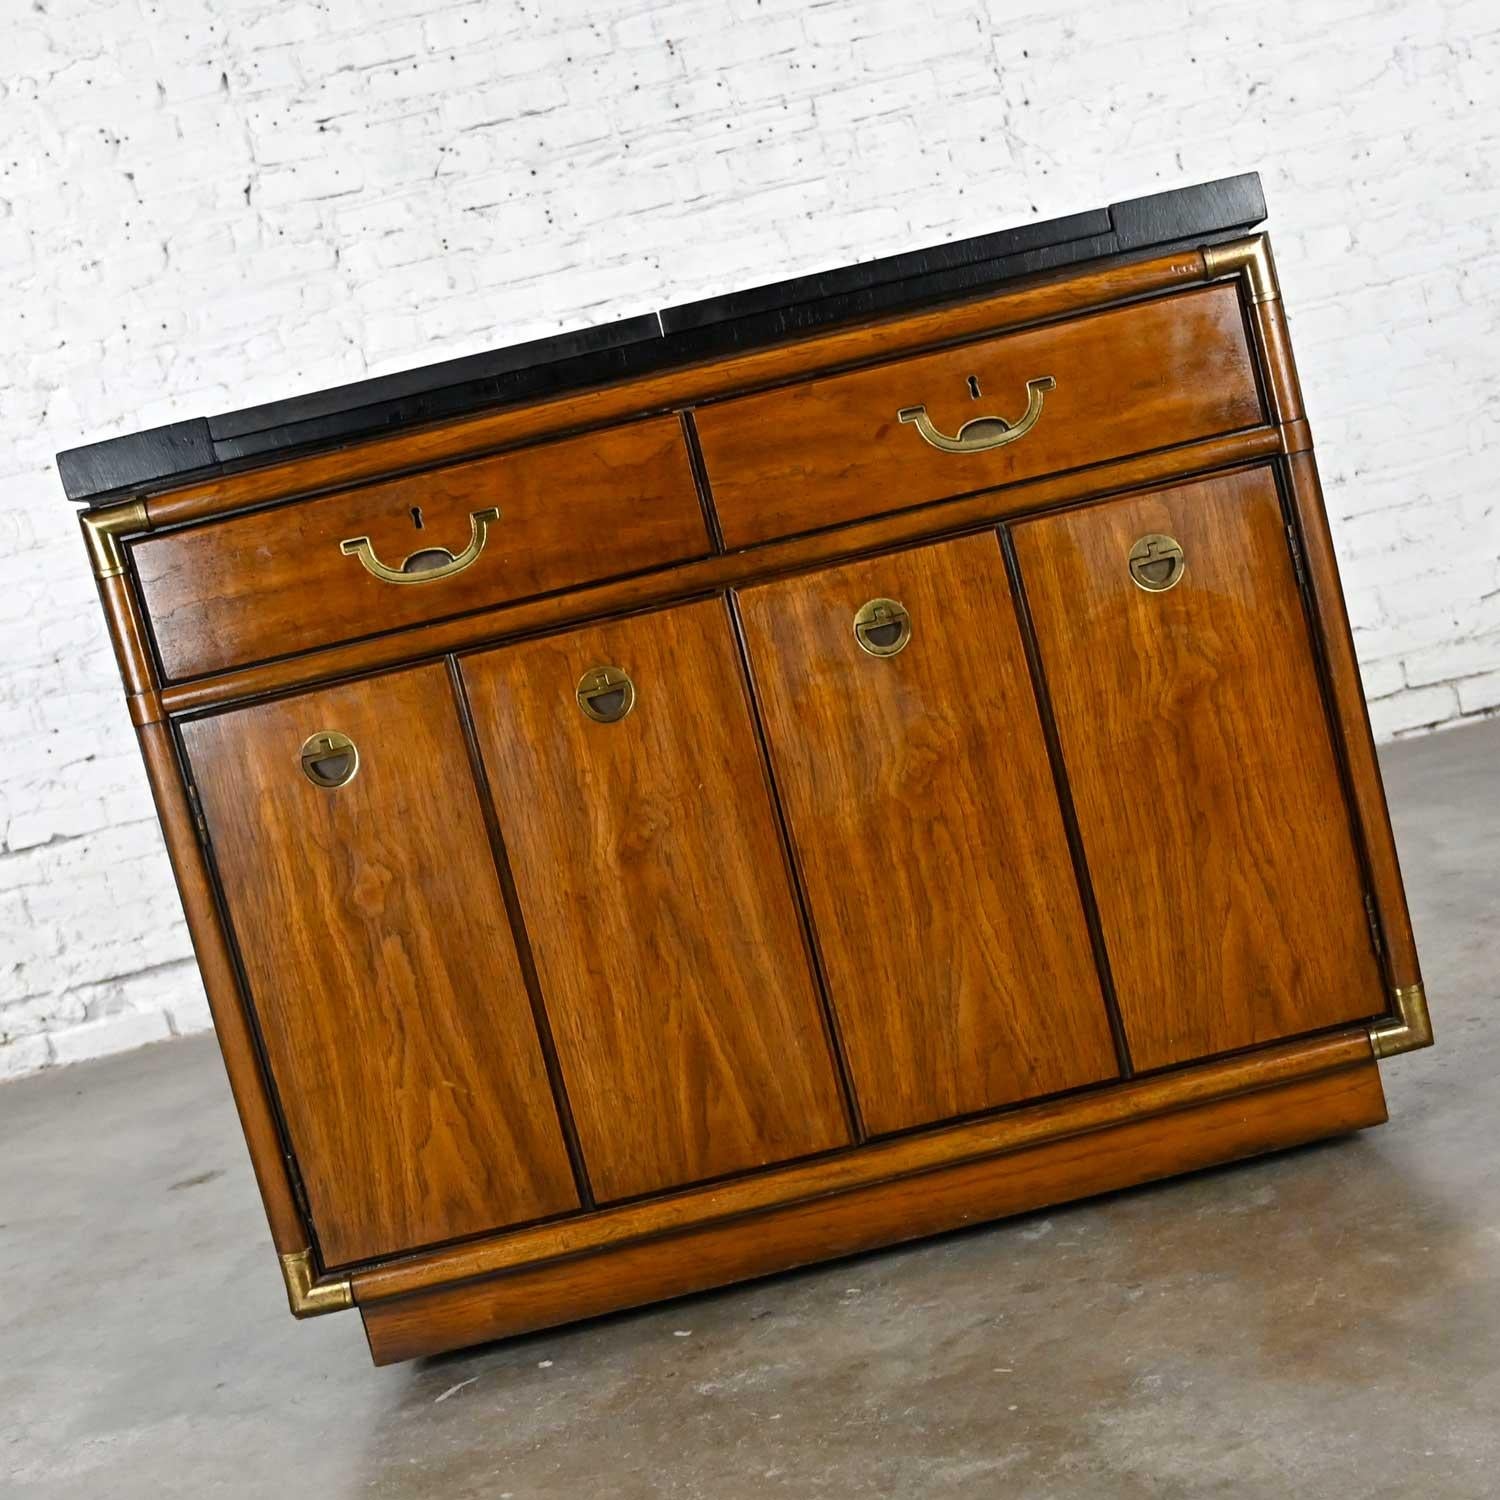 Fabulous vintage Campaign style dry bar in a medium-dark veneer, possibly pecan, with a black dyed wood top, an interior black laminate flip top, and antiqued brass plated hardware and casters by Drexel. Beautiful condition, keeping in mind that